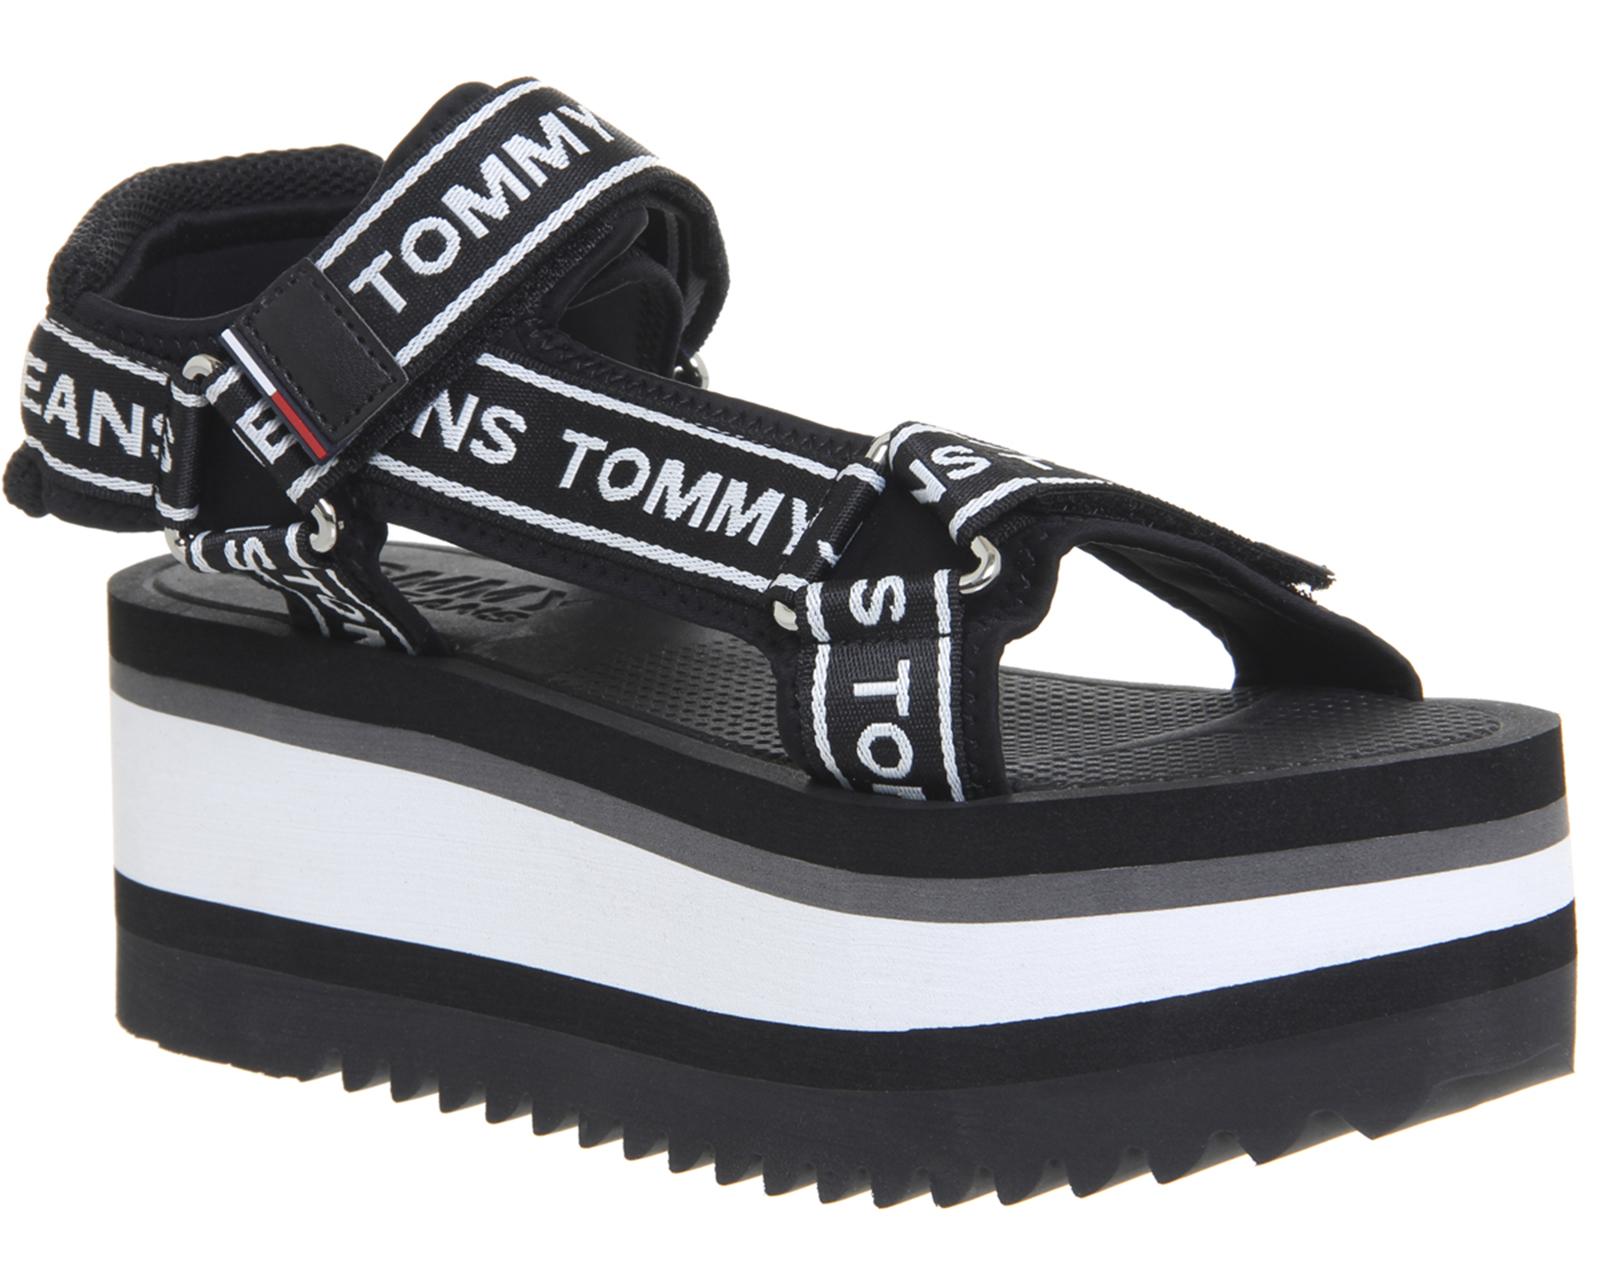 Tommy Hilfiger Rubber Tech Sandals in 